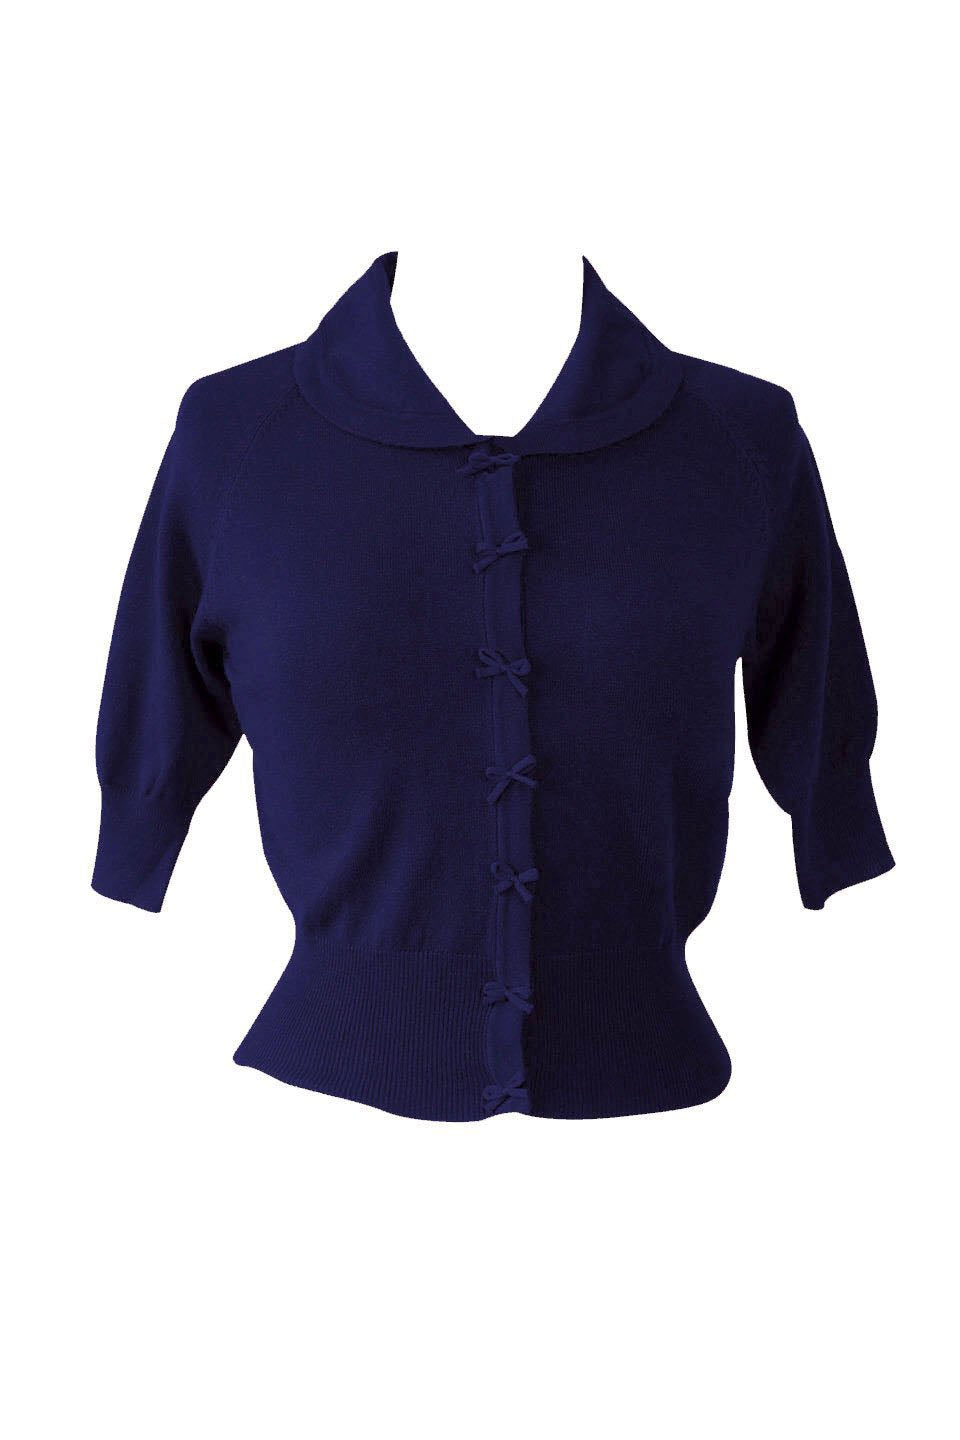 Cropped Navy Cardigan Sweater With Bow Details -1950s style | Weekend Doll